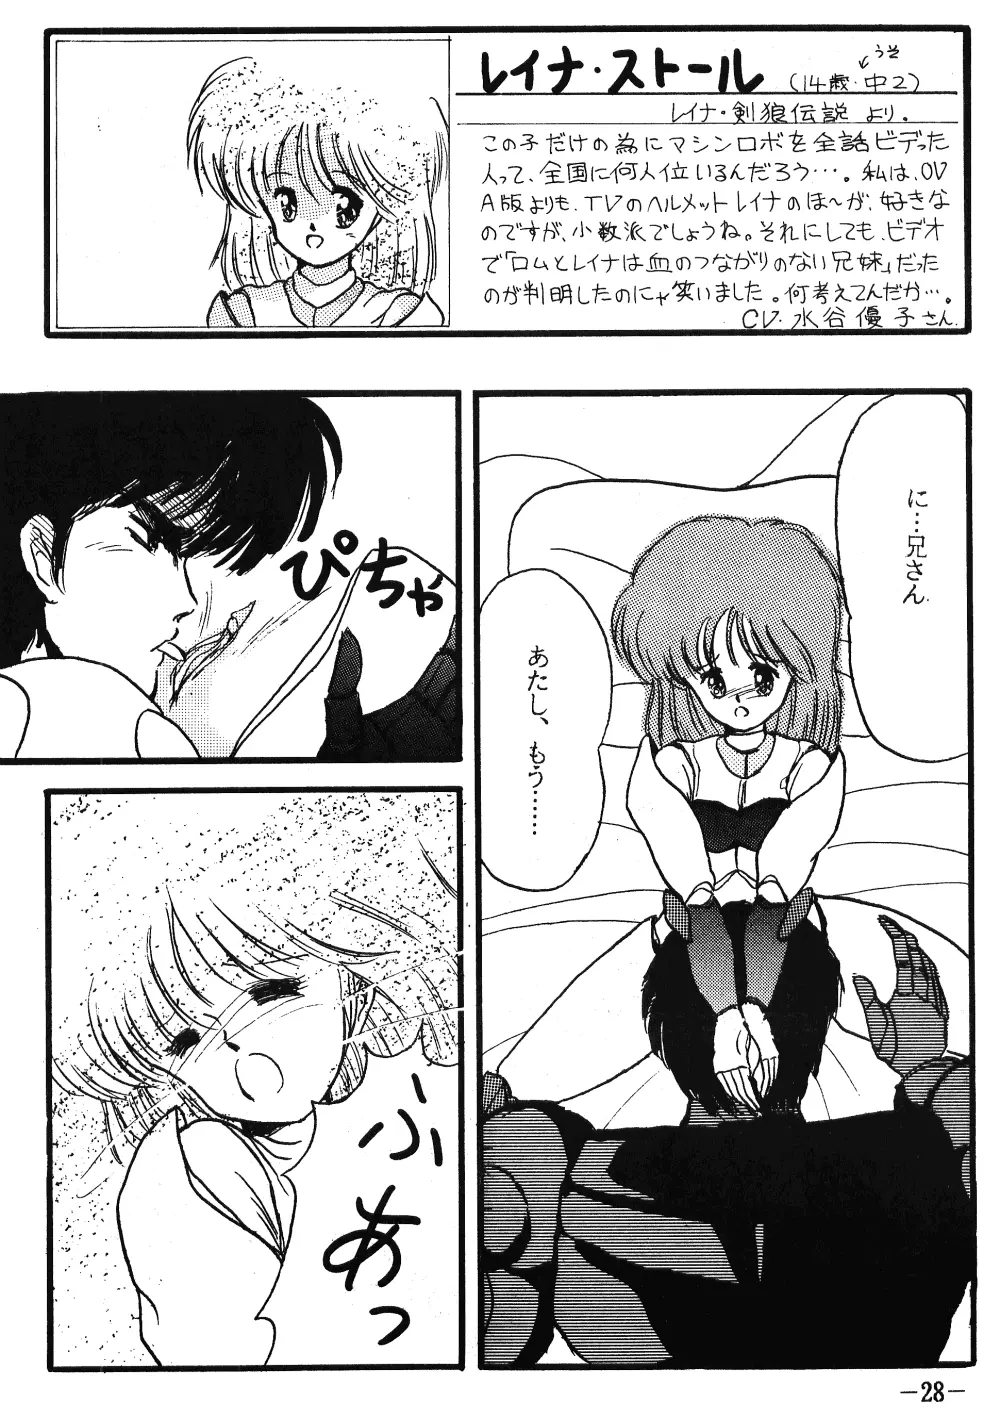 Fro2 Fight Vol. 1 Page.28